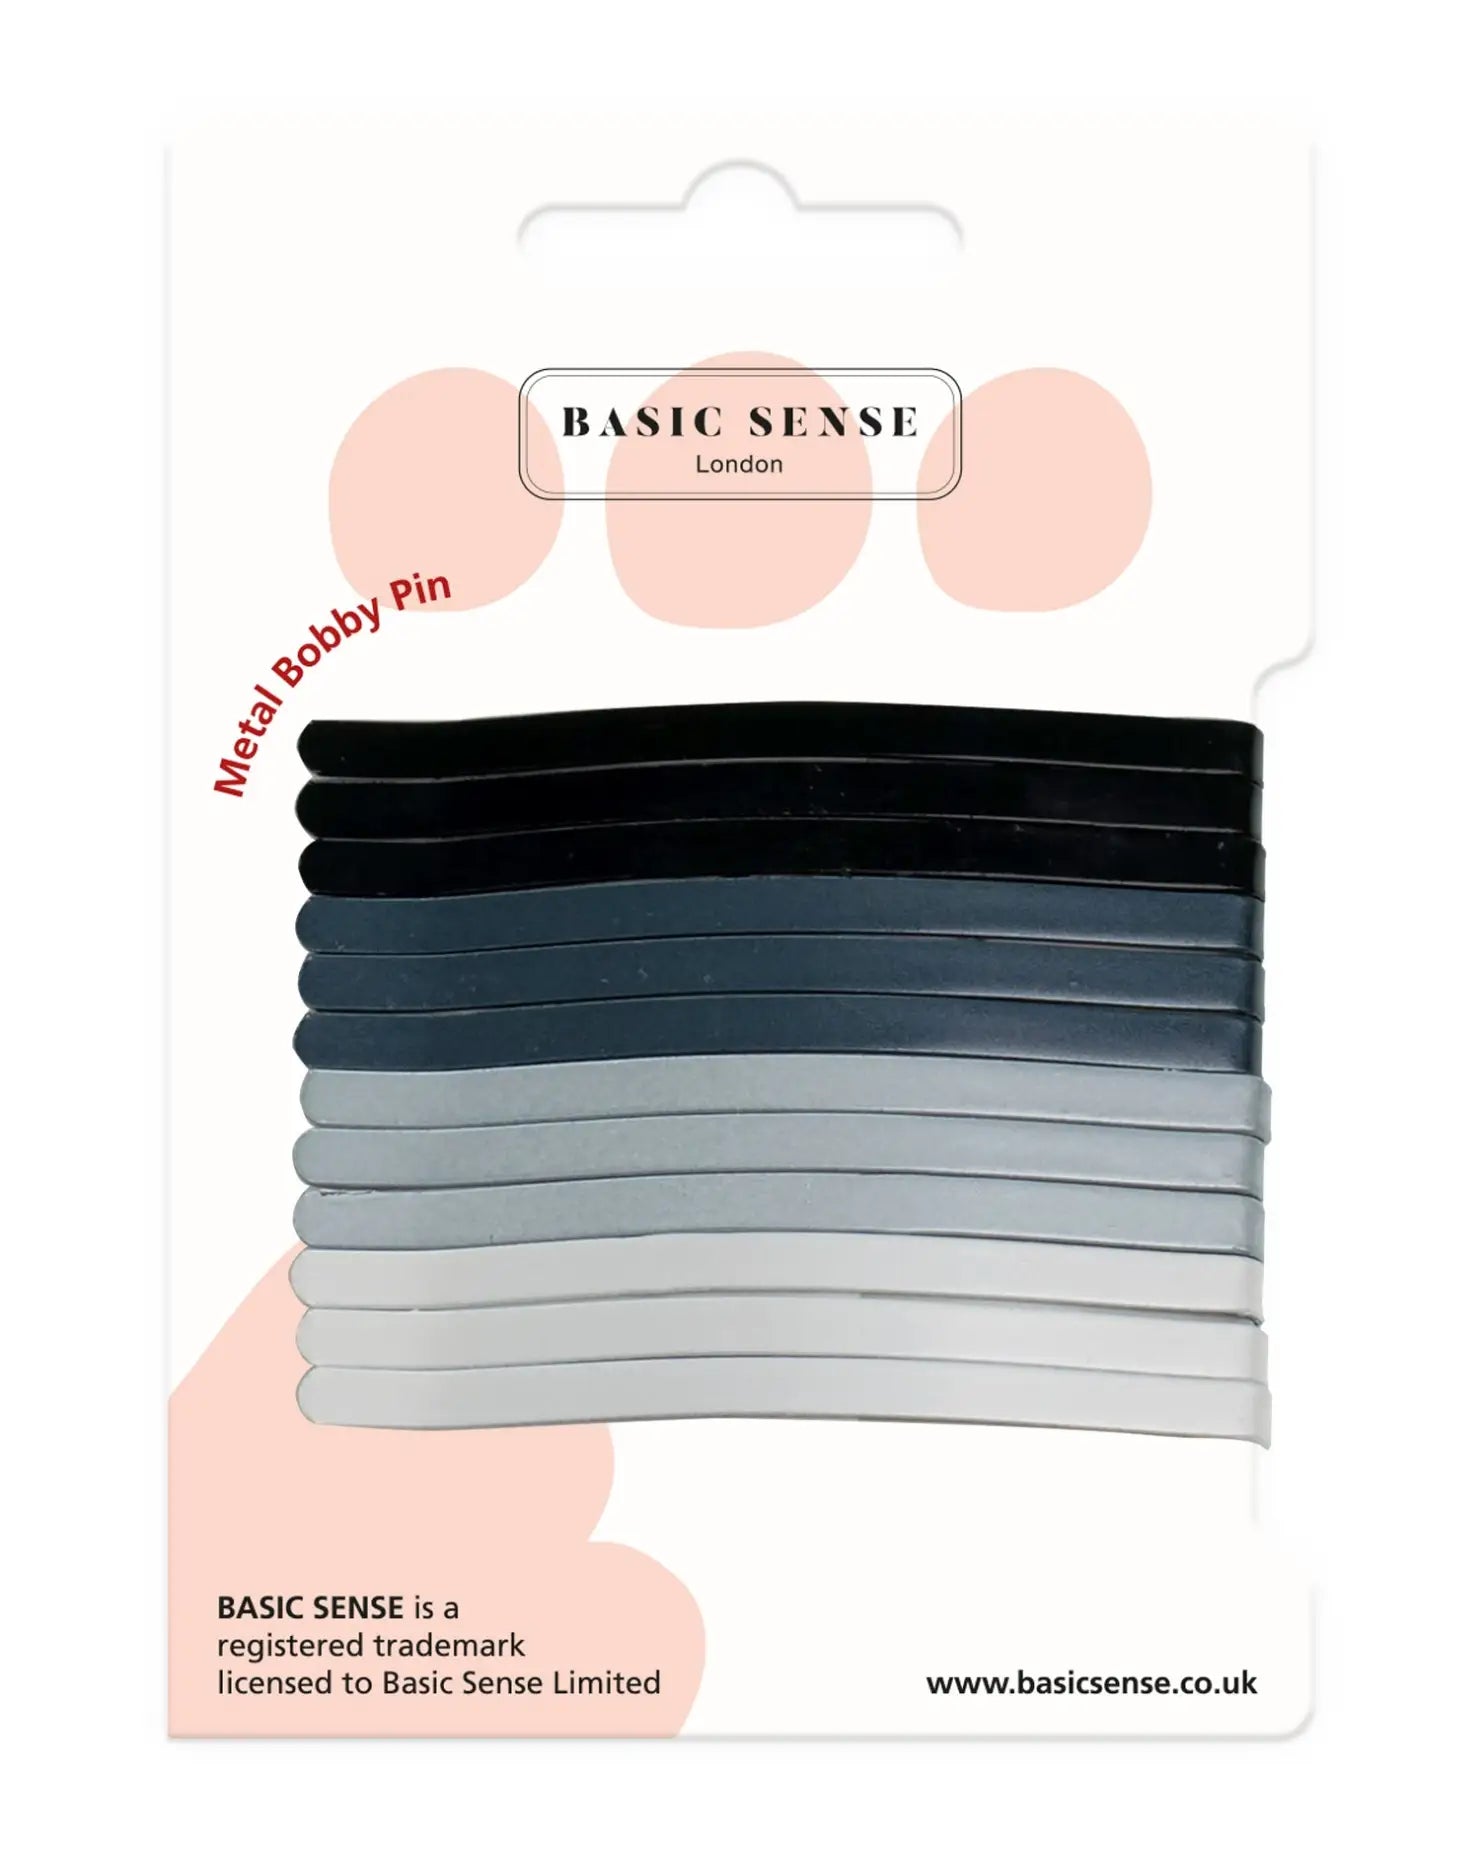 Basic hair ties in black, white, and grey next to Jumbo Metal Bobby Pins Hair Clips.